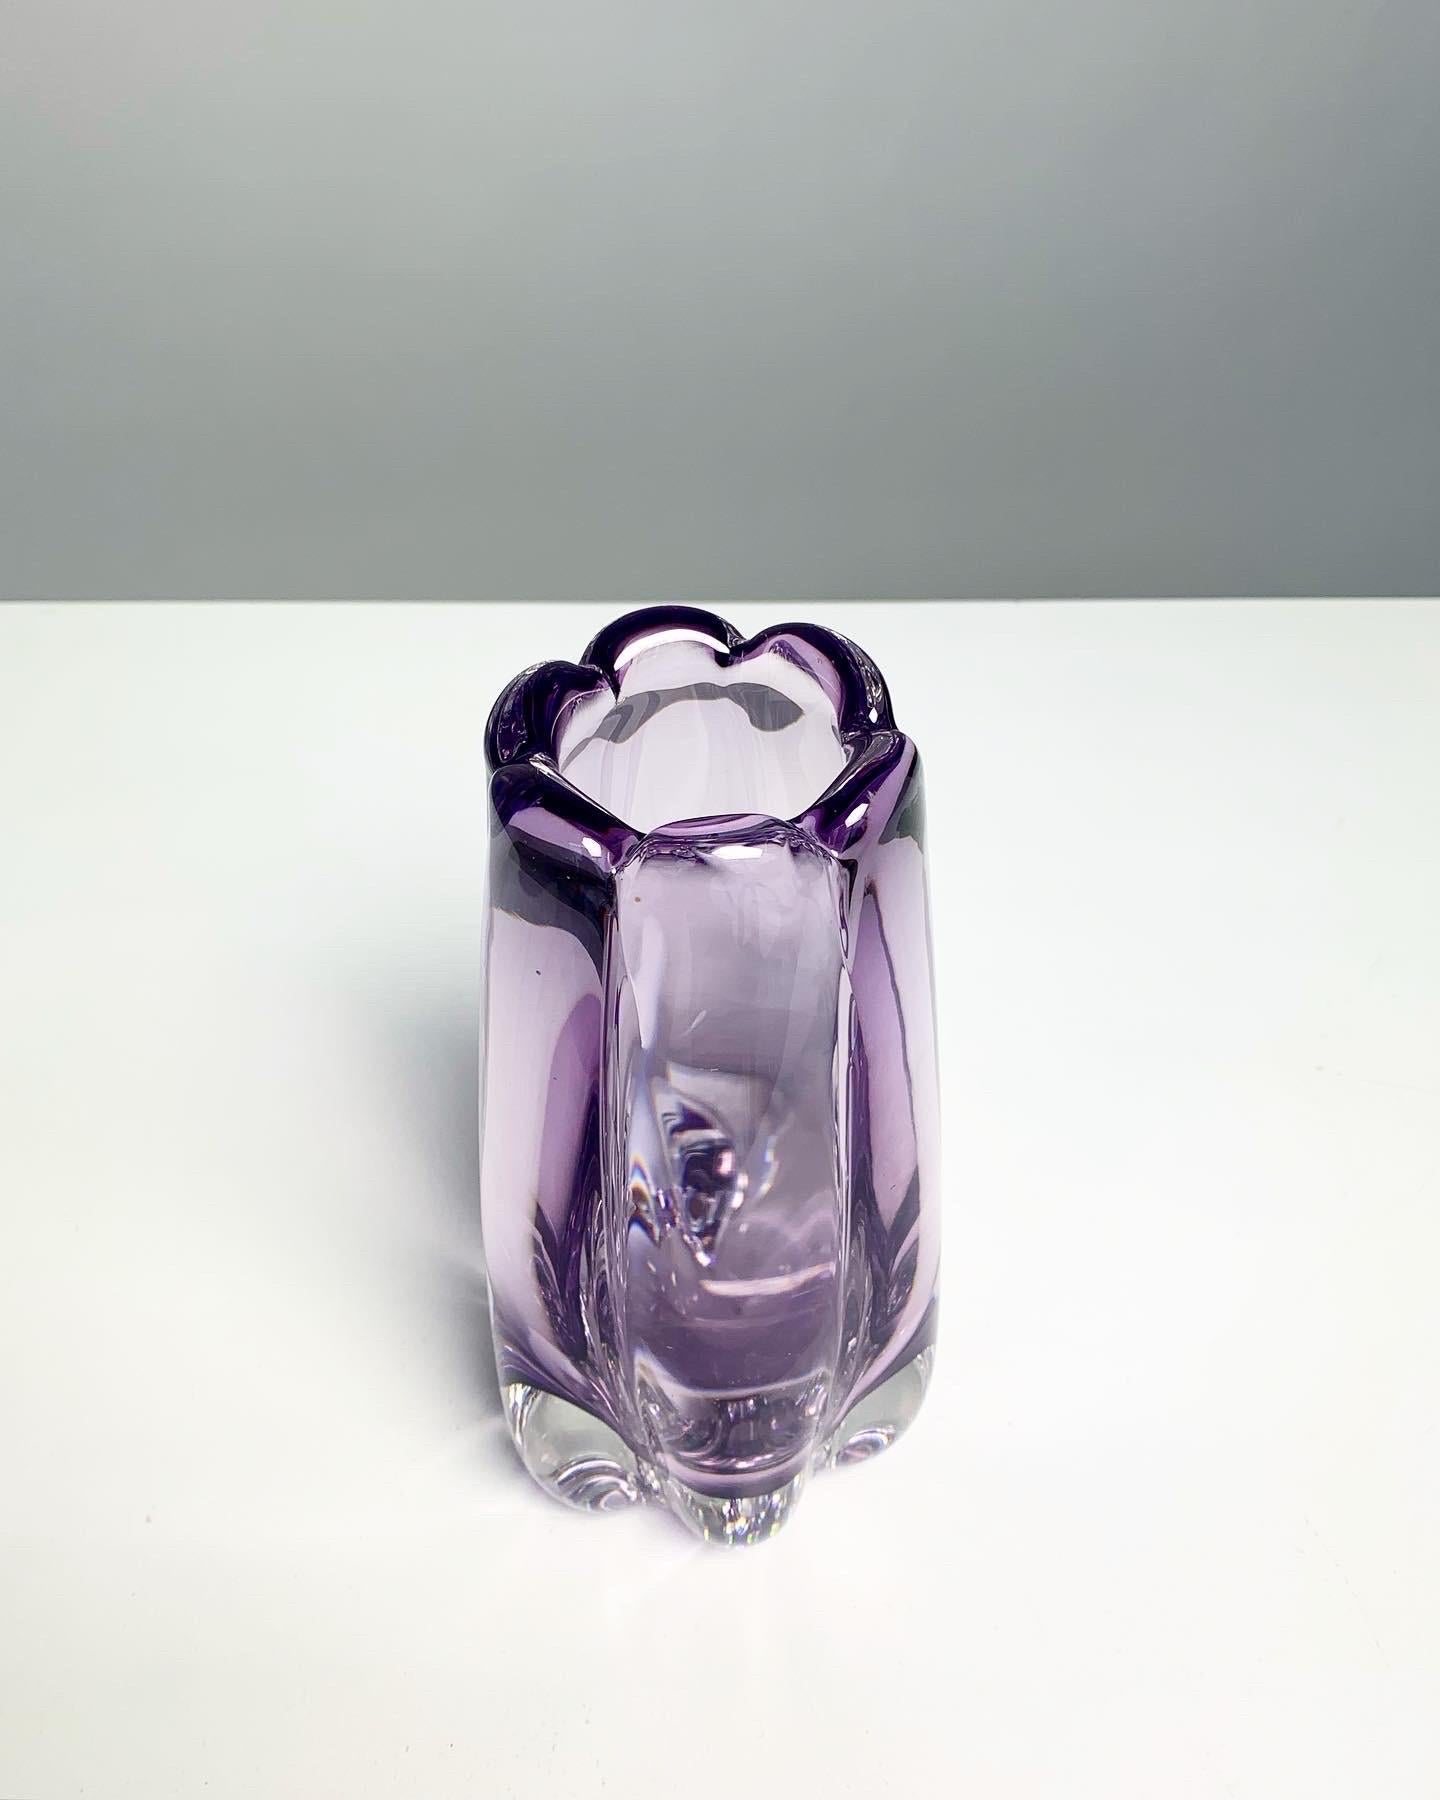 Hand-Crafted Elis Bergh Crystal Glass Vase Amethyst Colored Sommerso Kosta Sweden 1940s